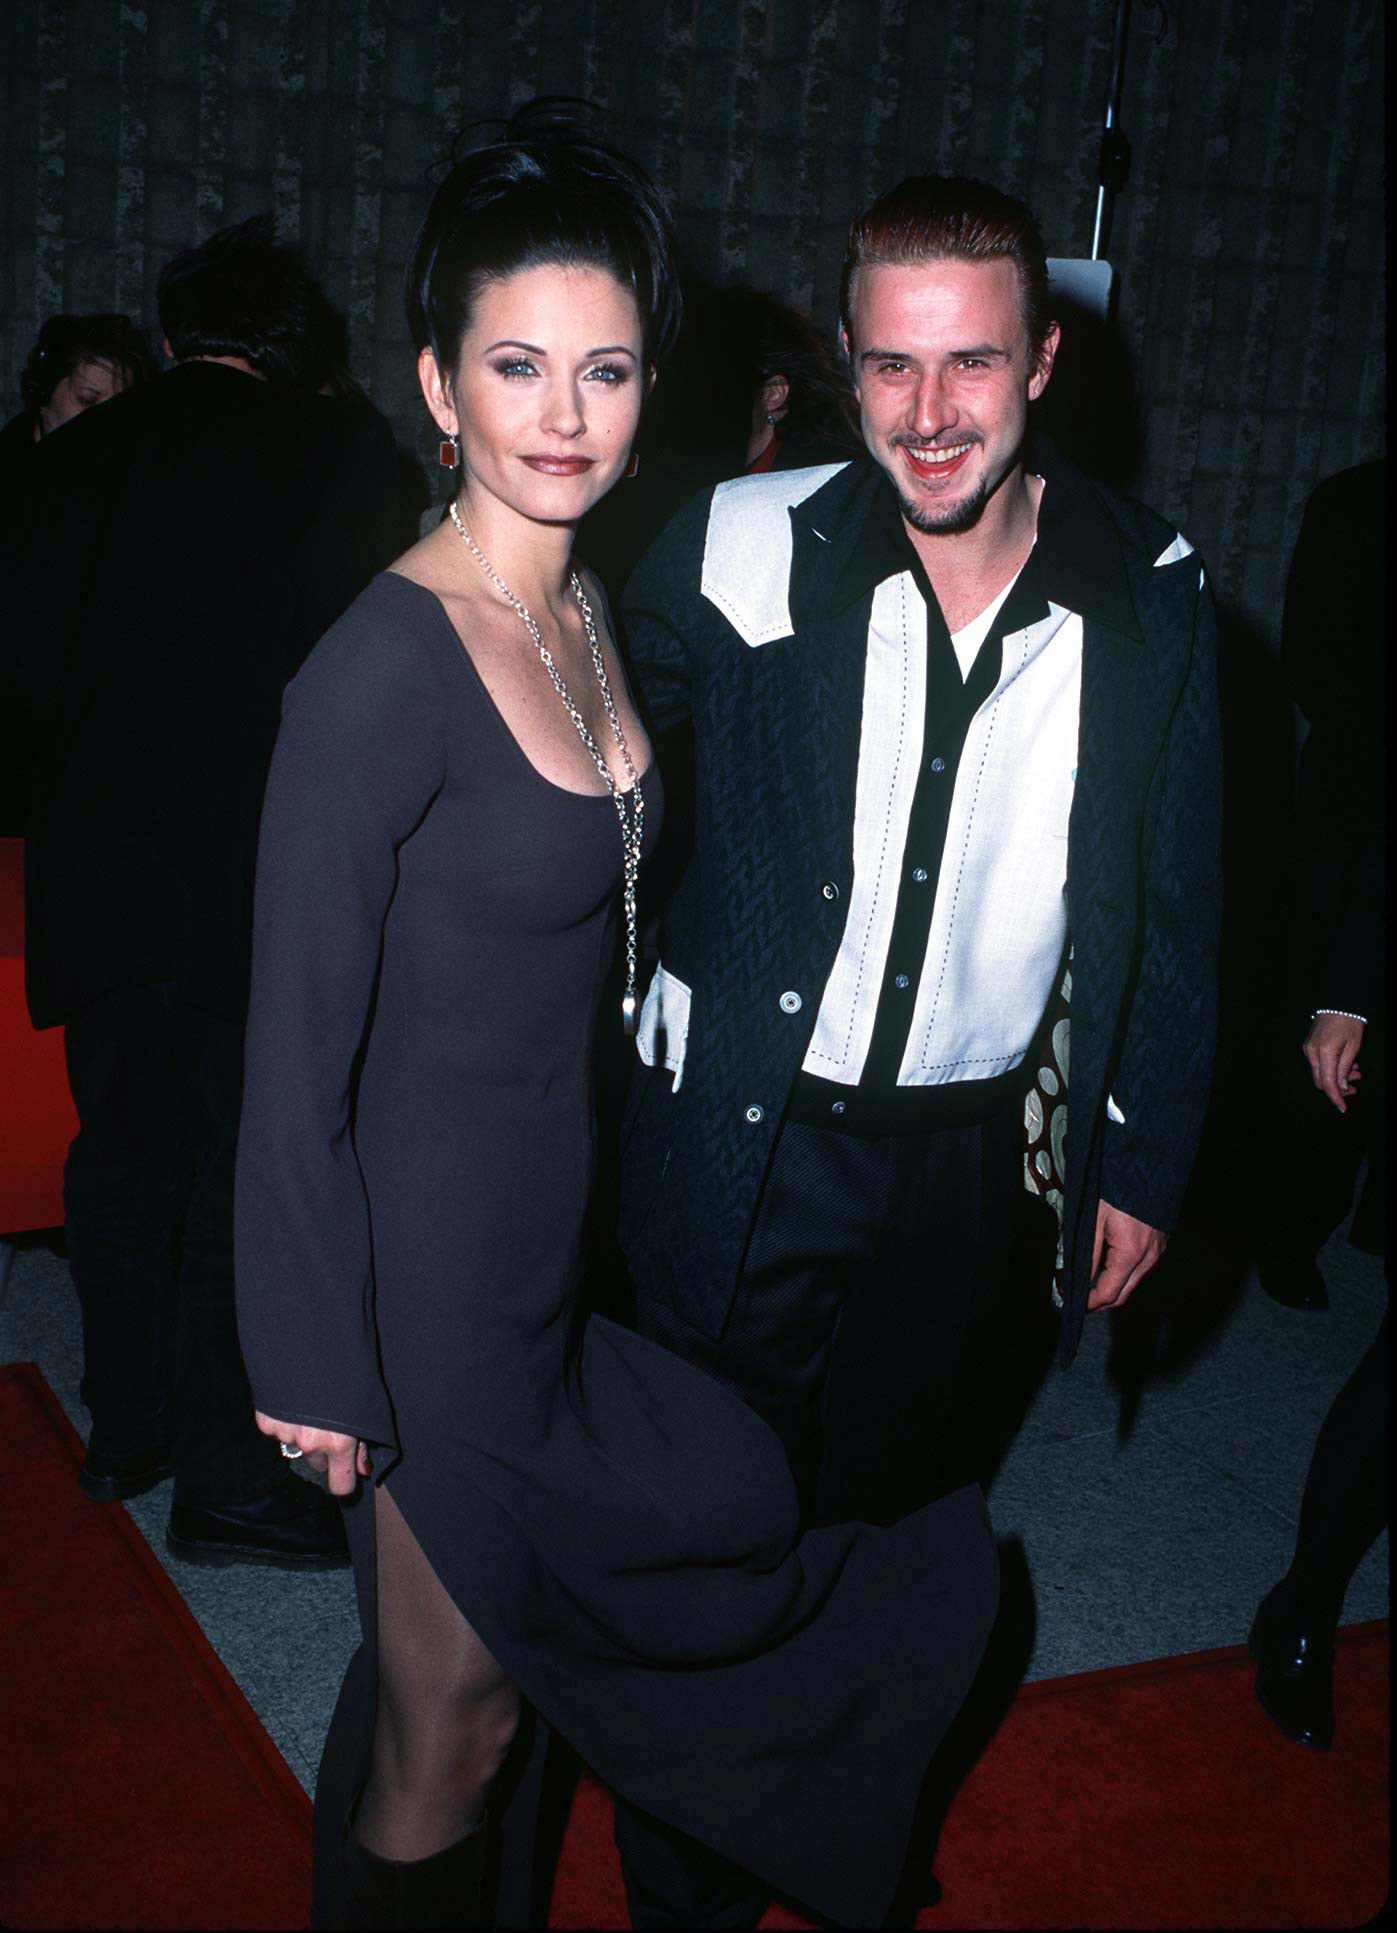 Courteney Cox in a long-sleeved gray dress and David Arquette in a black suit with white trim